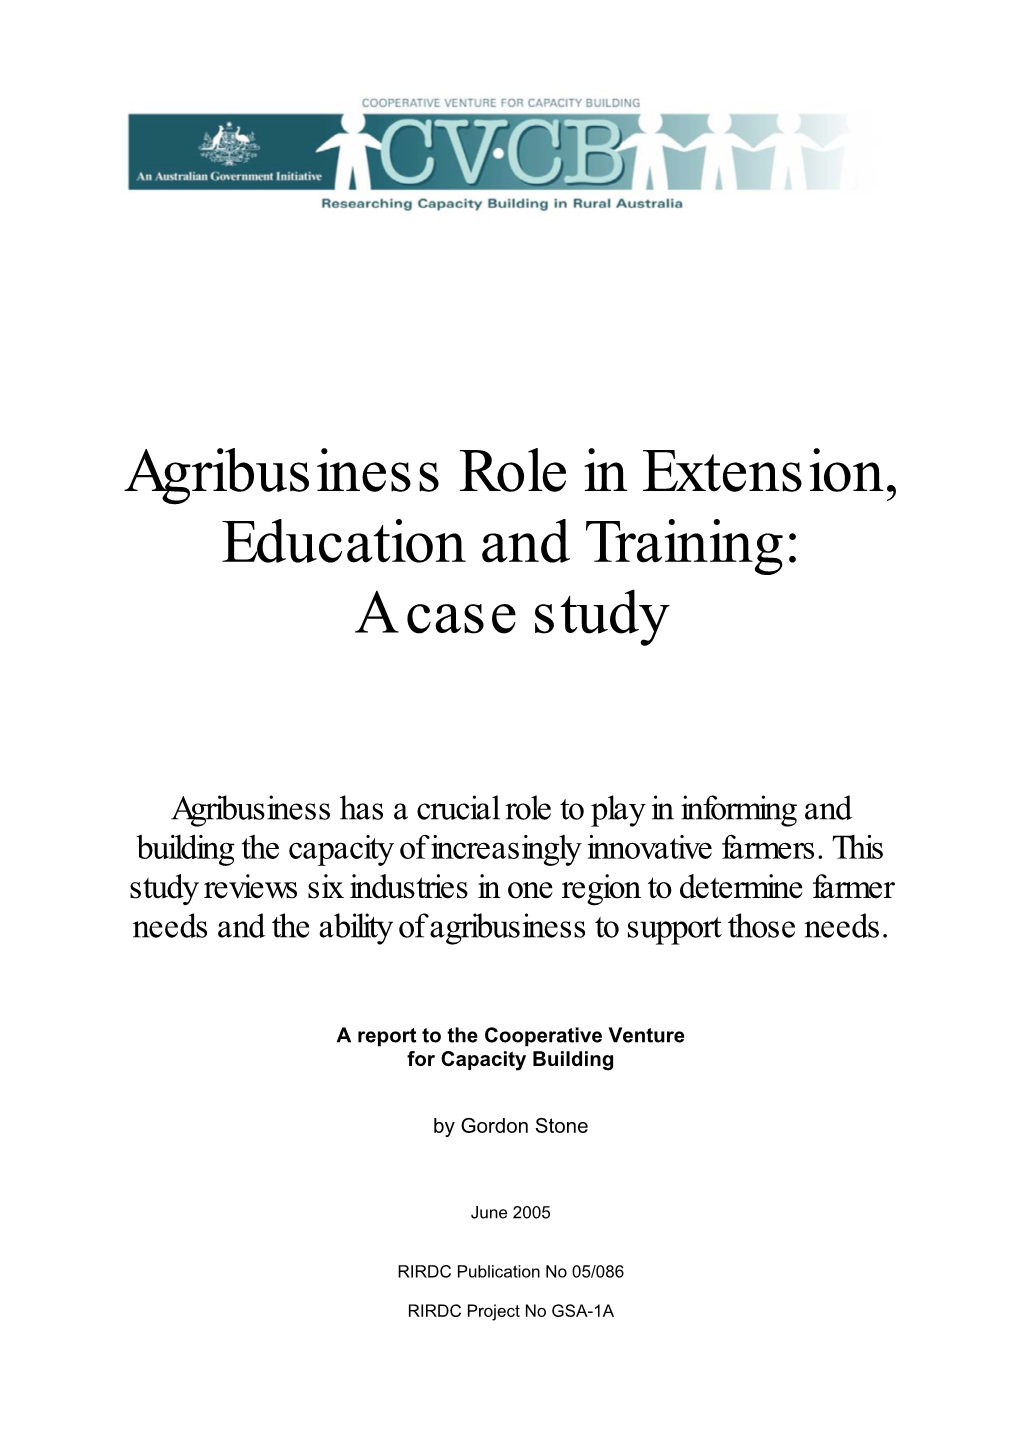 Agribusiness Role in Extension, Education and Training: a Case Study